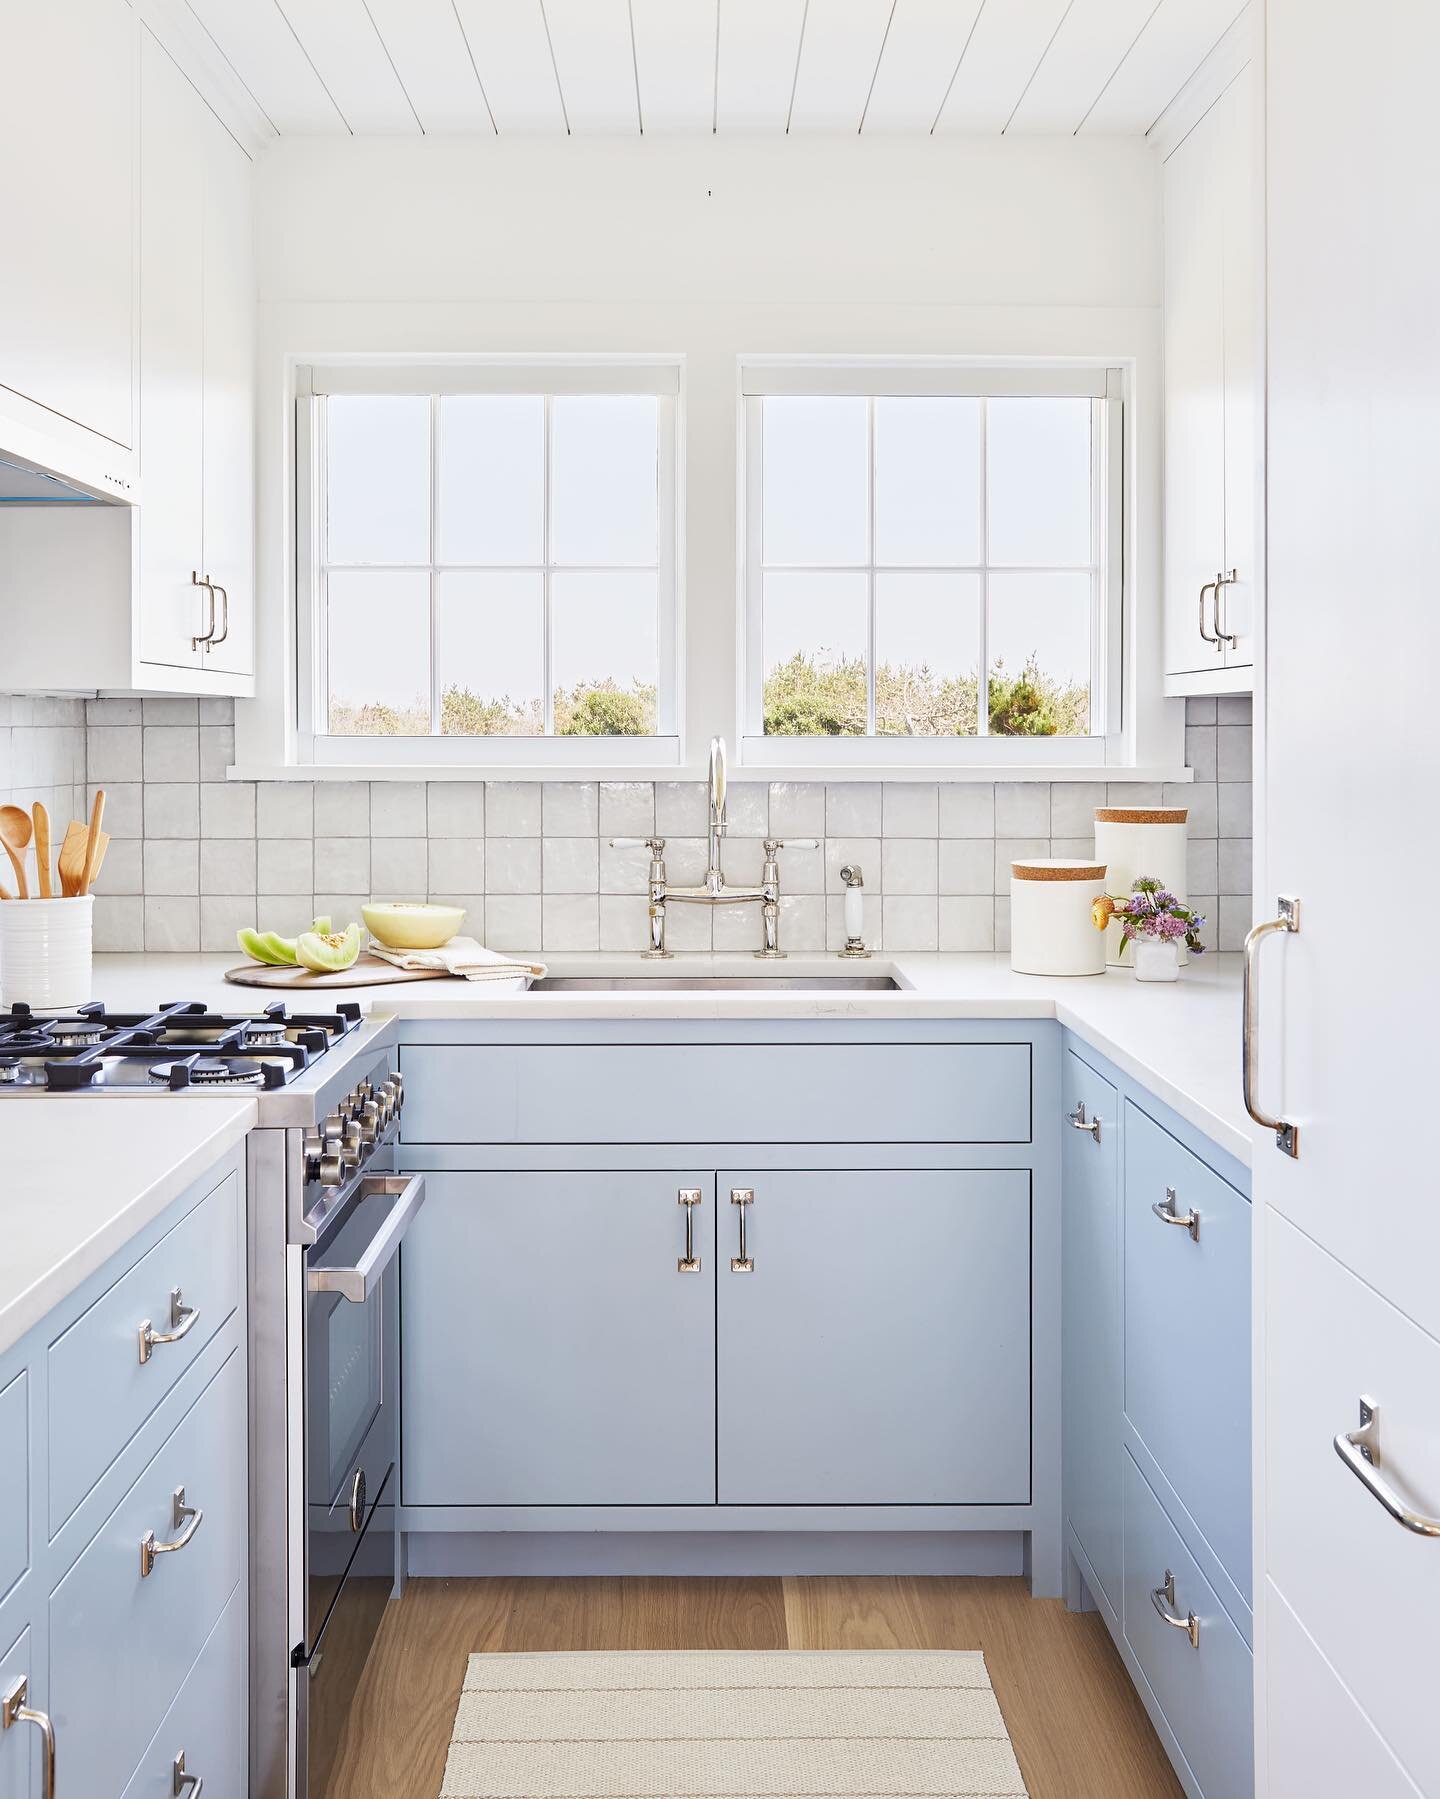 Swipe ➡️ to see the before of the Guest Cottage Kitchen at our recent Nantucket project. It was cute and &lsquo;cottagey&rsquo; but not nearly as functional or pretty!! @s.m.roethke 📷 @readmckendree